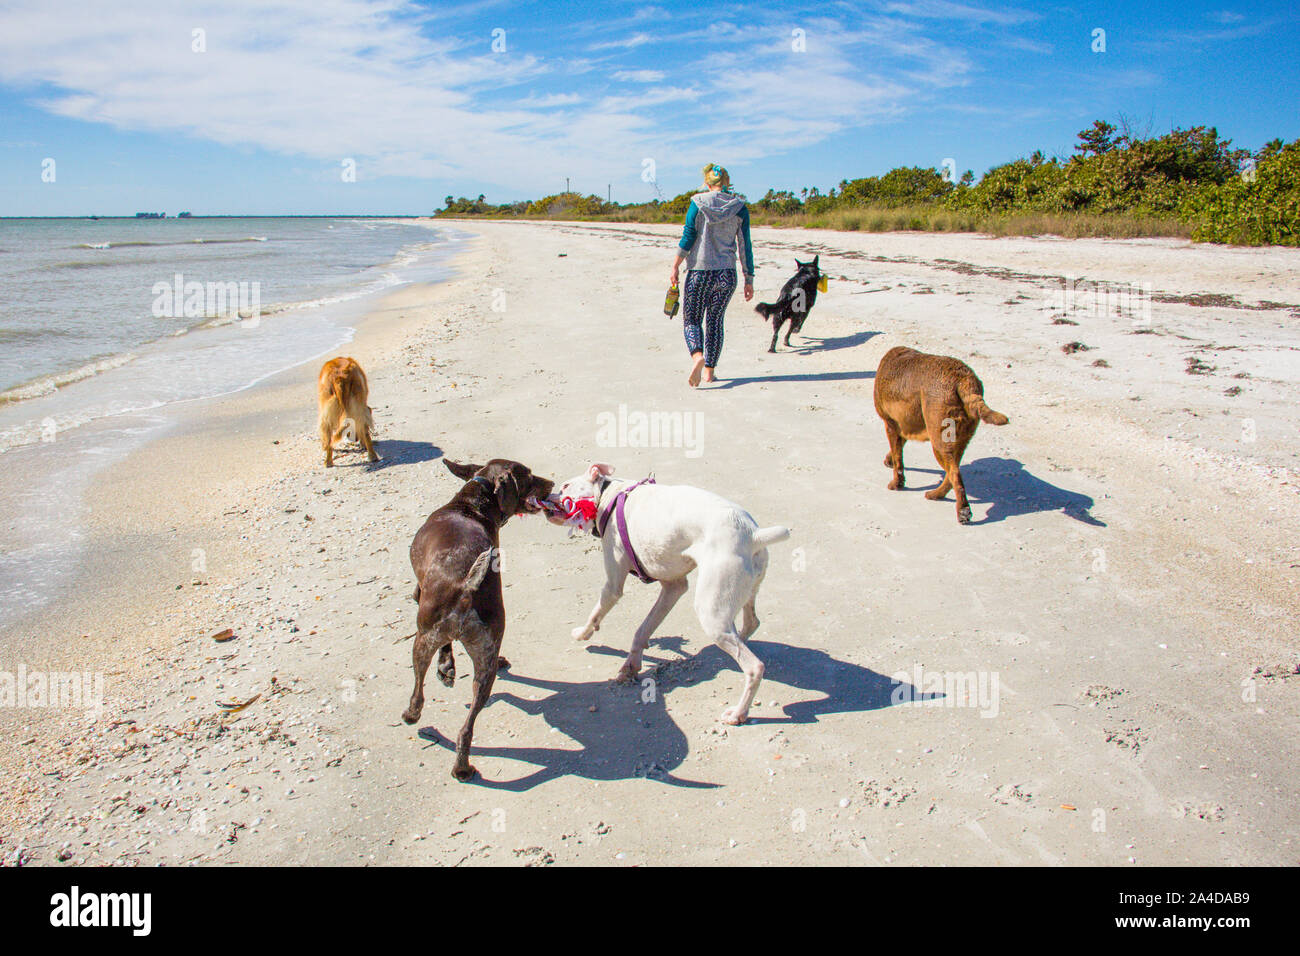 Woman walking on beach with five dogs, United States Stock Photo